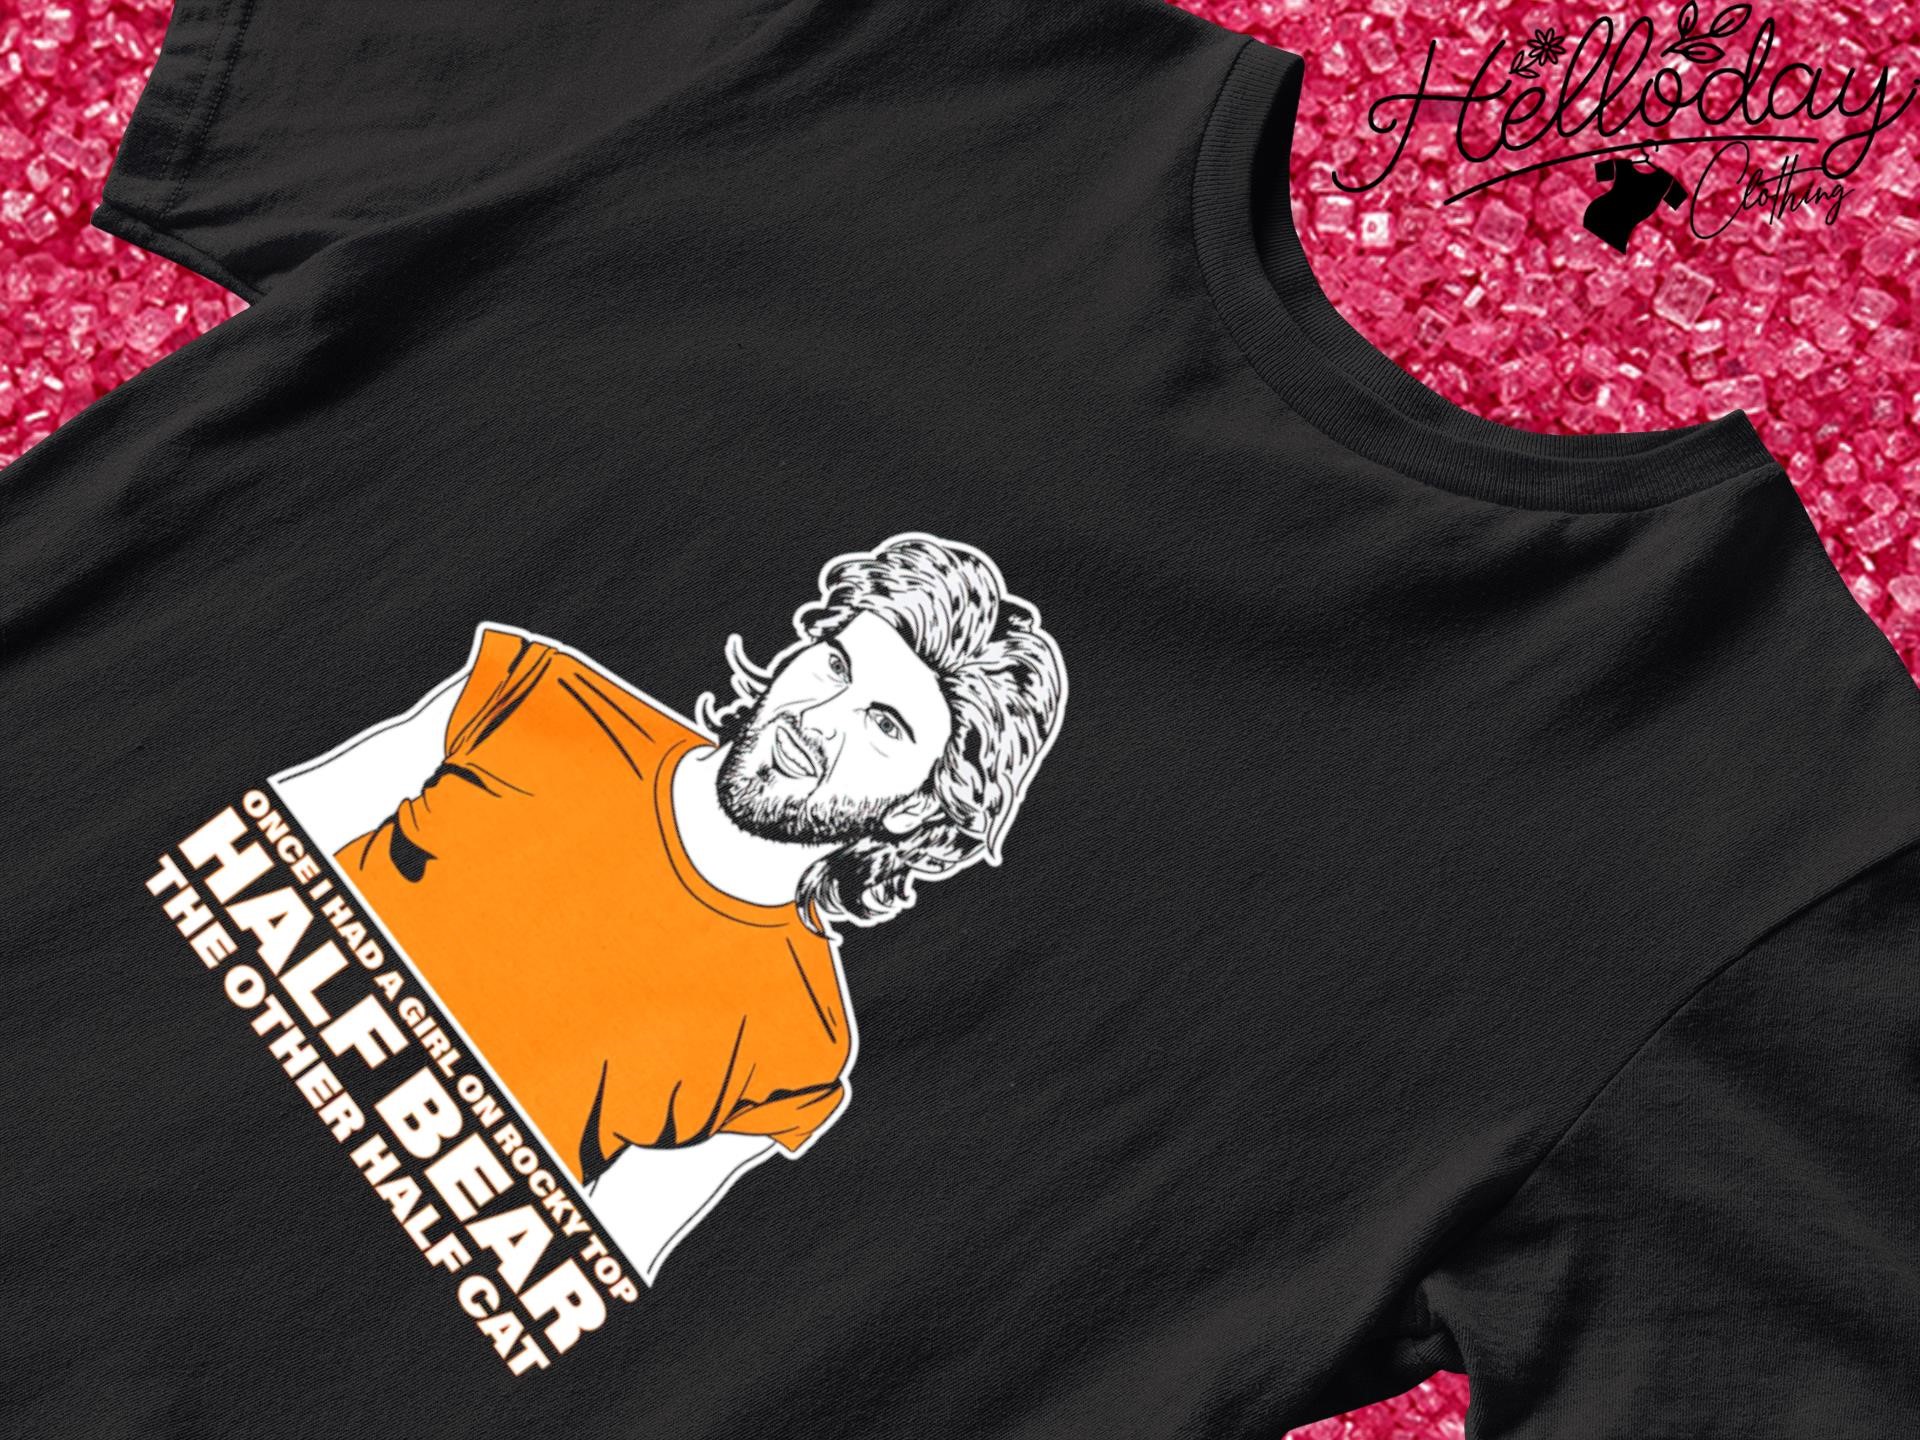 Once I had a girl on rocky top Half bear the other half cat shirt